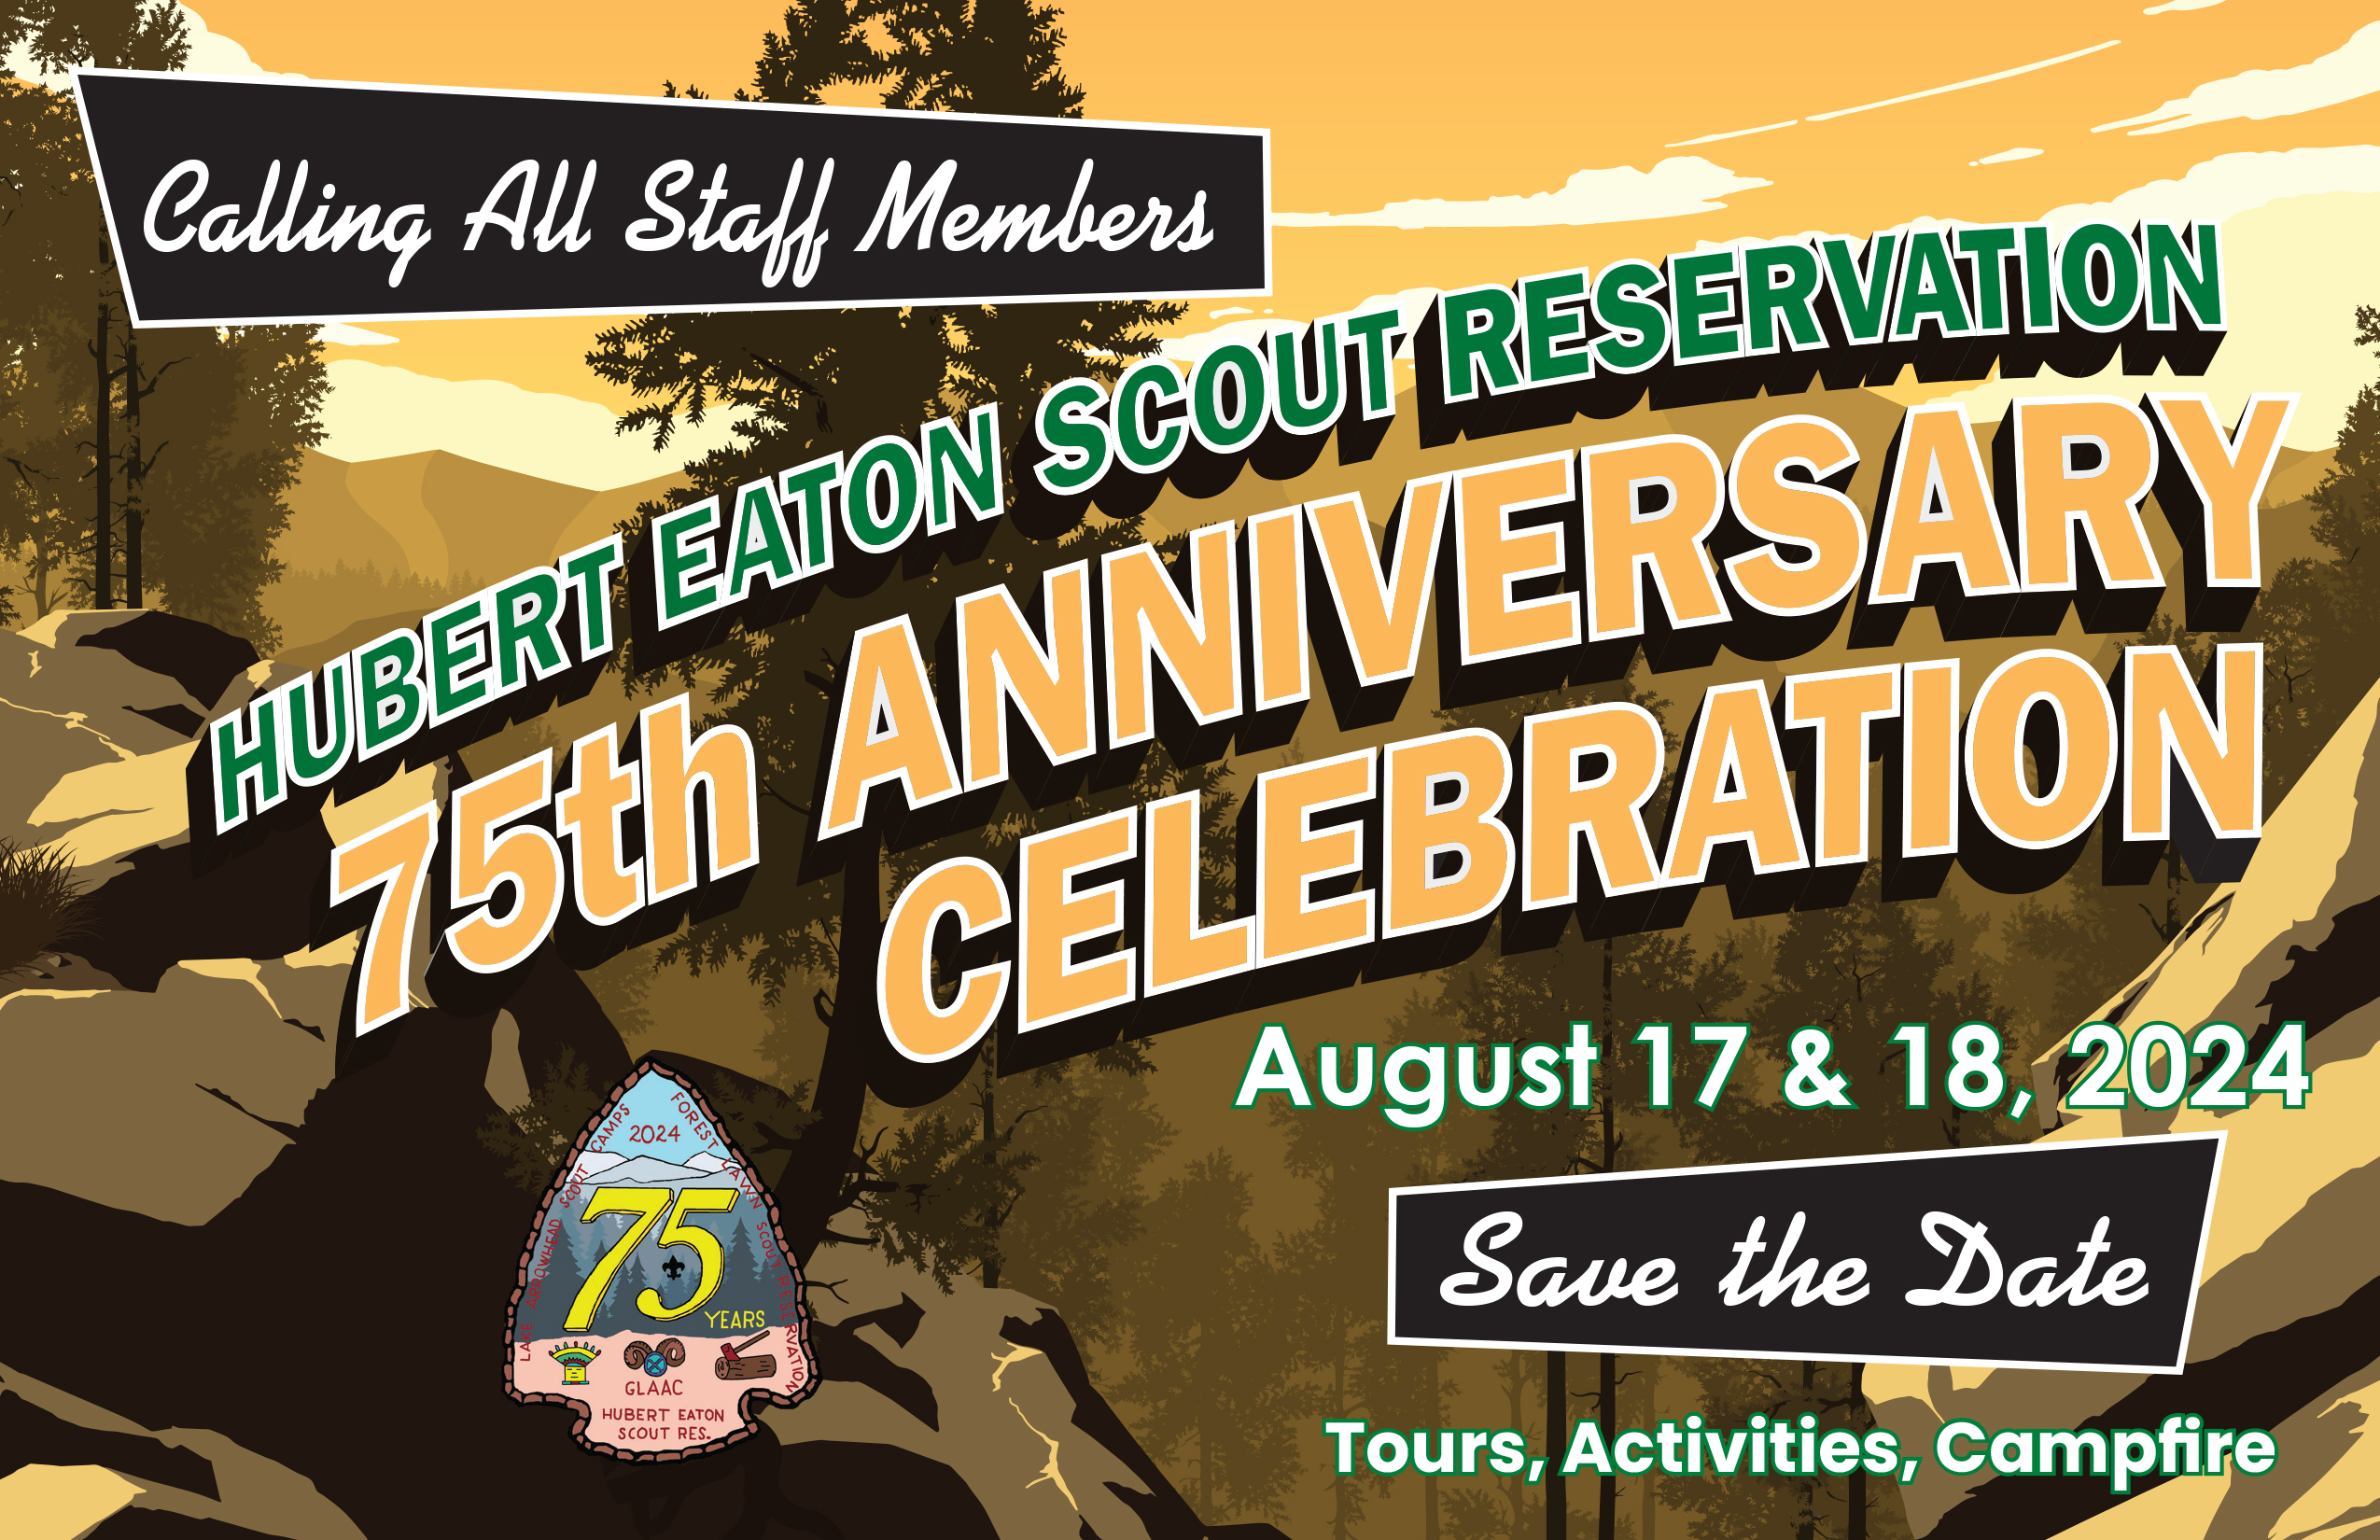 Hubert Eaton Scout Reservation's 75th Anniversary Celebration